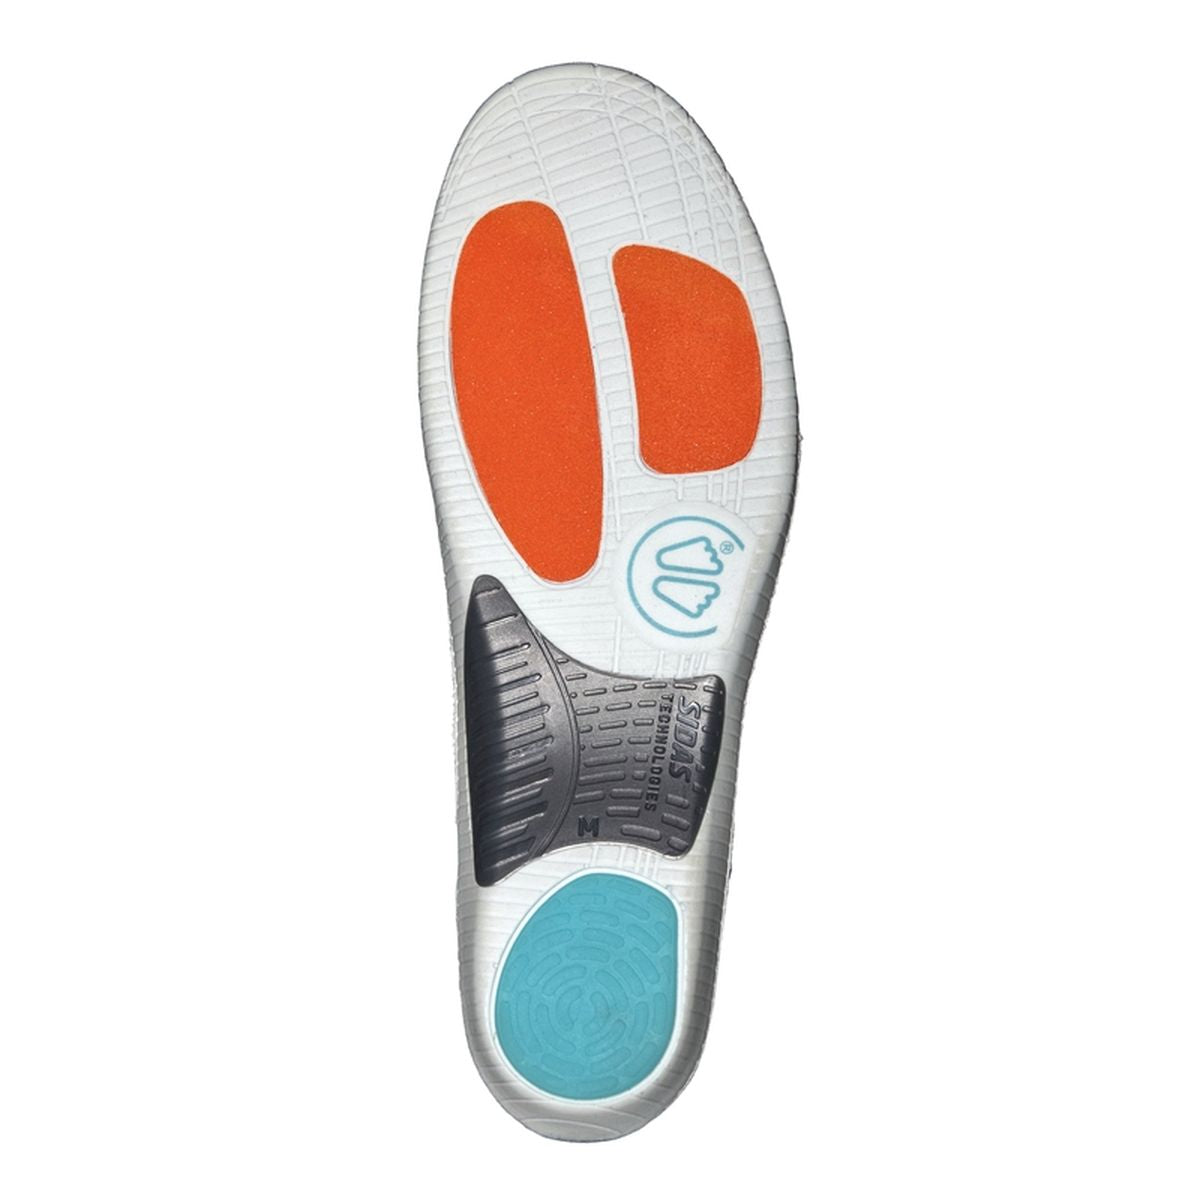 MAX PROTECT ACTIV' MULTISPORT INSOLES